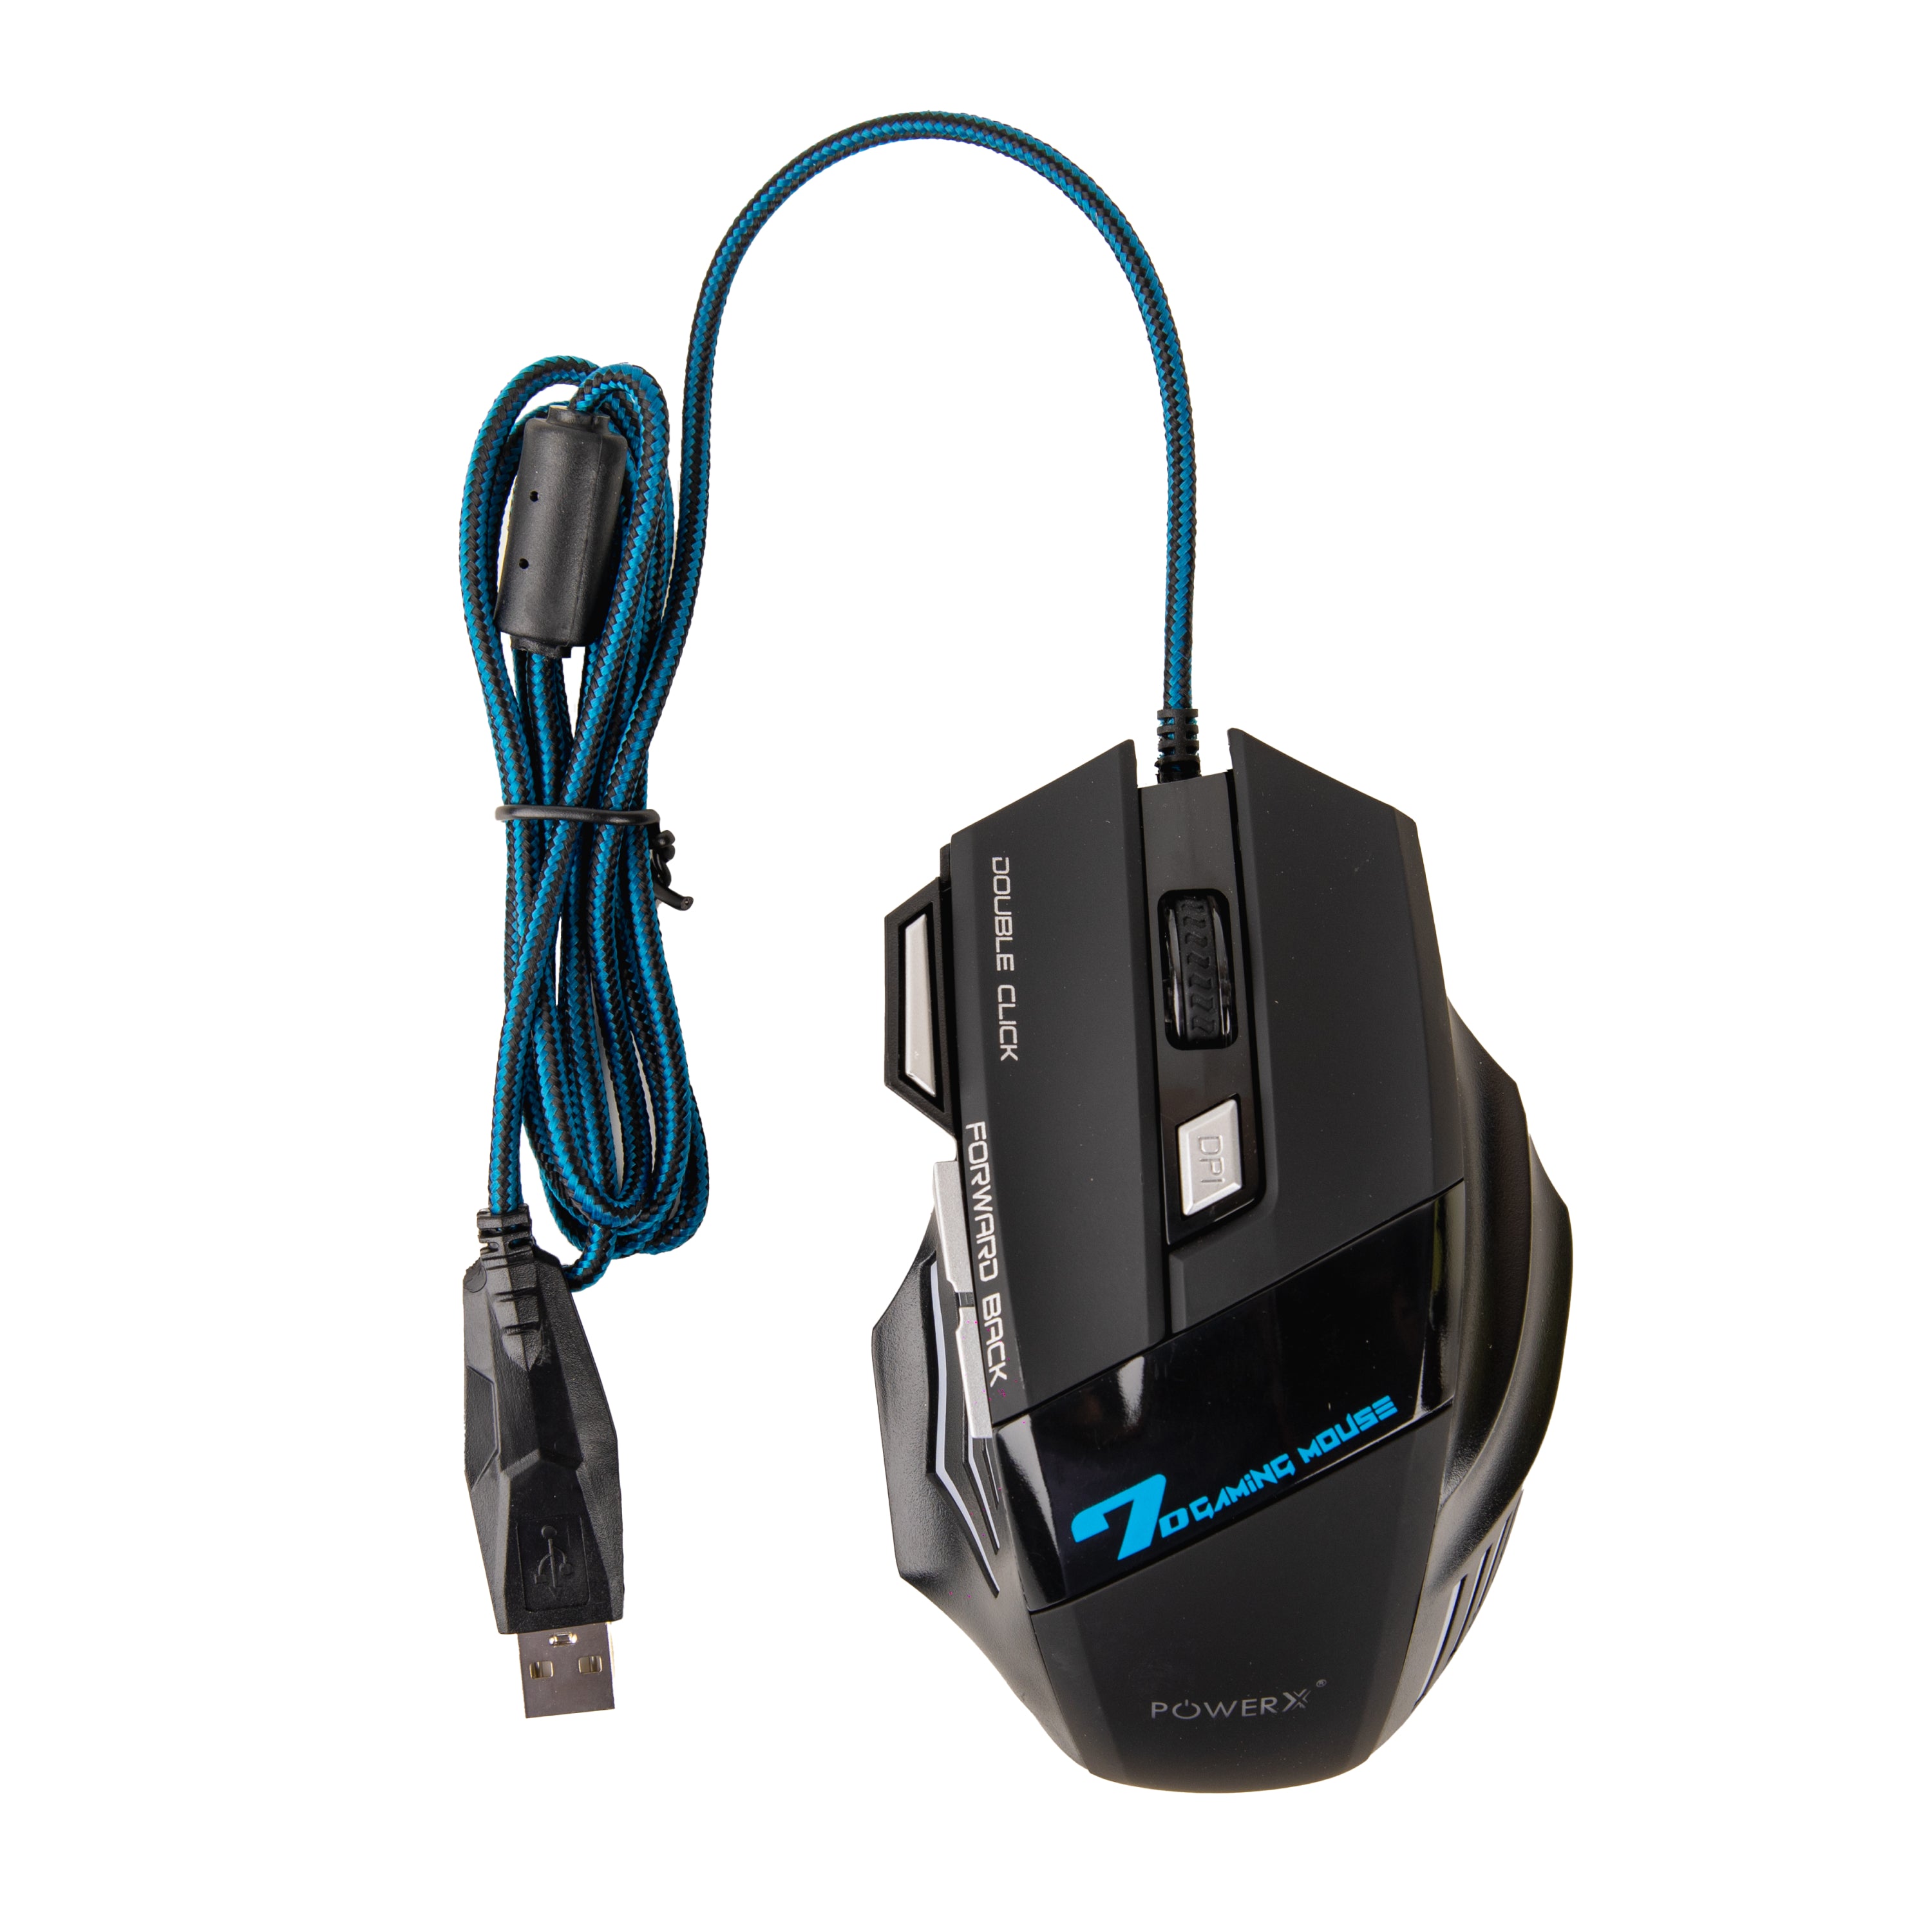 USB WIRED GAMING MOUSE PWX-RAPIDWAVE-U30